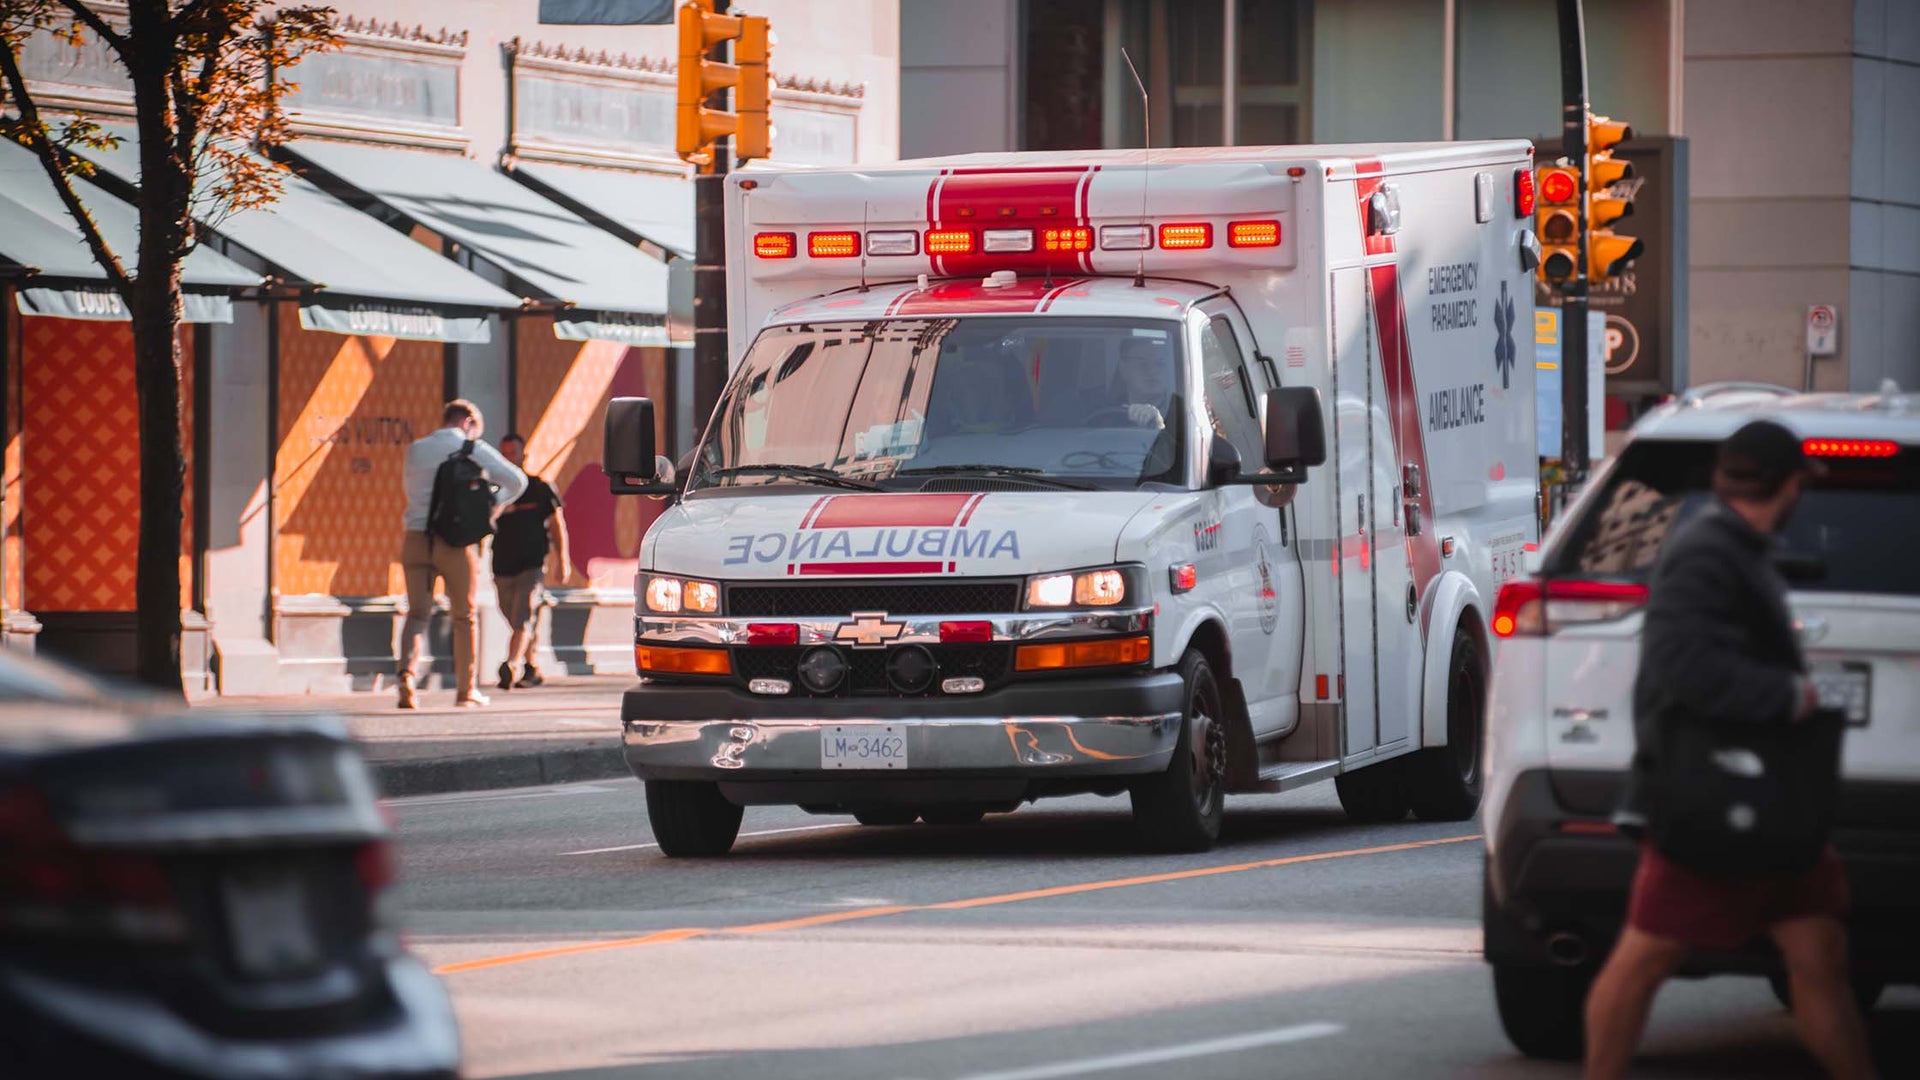 a first responder ambulance driving down on a busy street